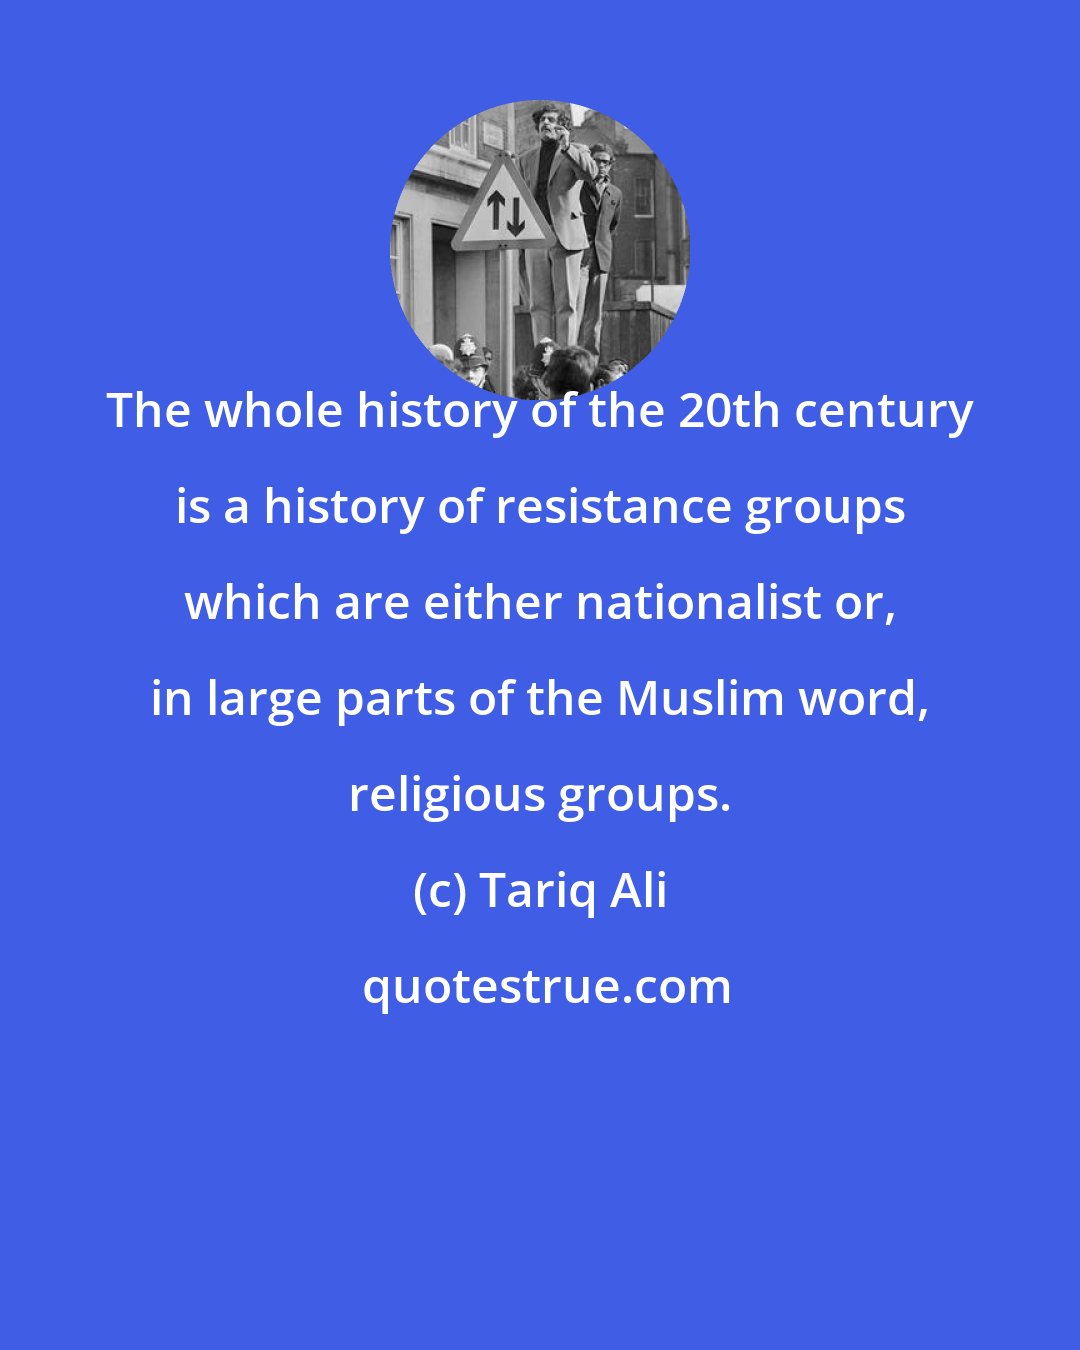 Tariq Ali: The whole history of the 20th century is a history of resistance groups which are either nationalist or, in large parts of the Muslim word, religious groups.